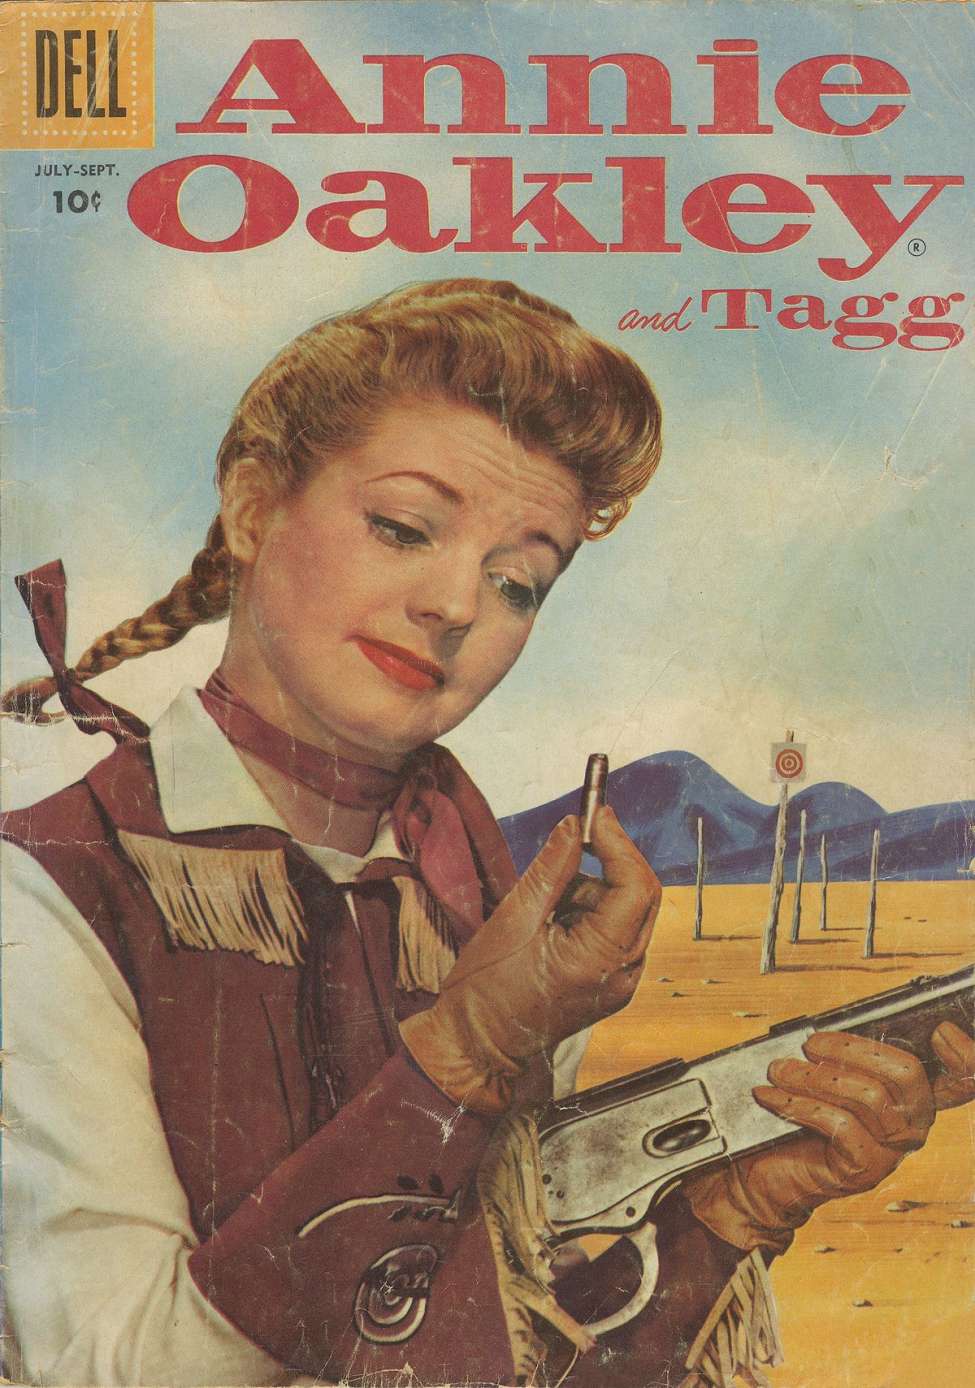 Annie Oakley and Tagg 08 (Dell Comics / Western Publishing)